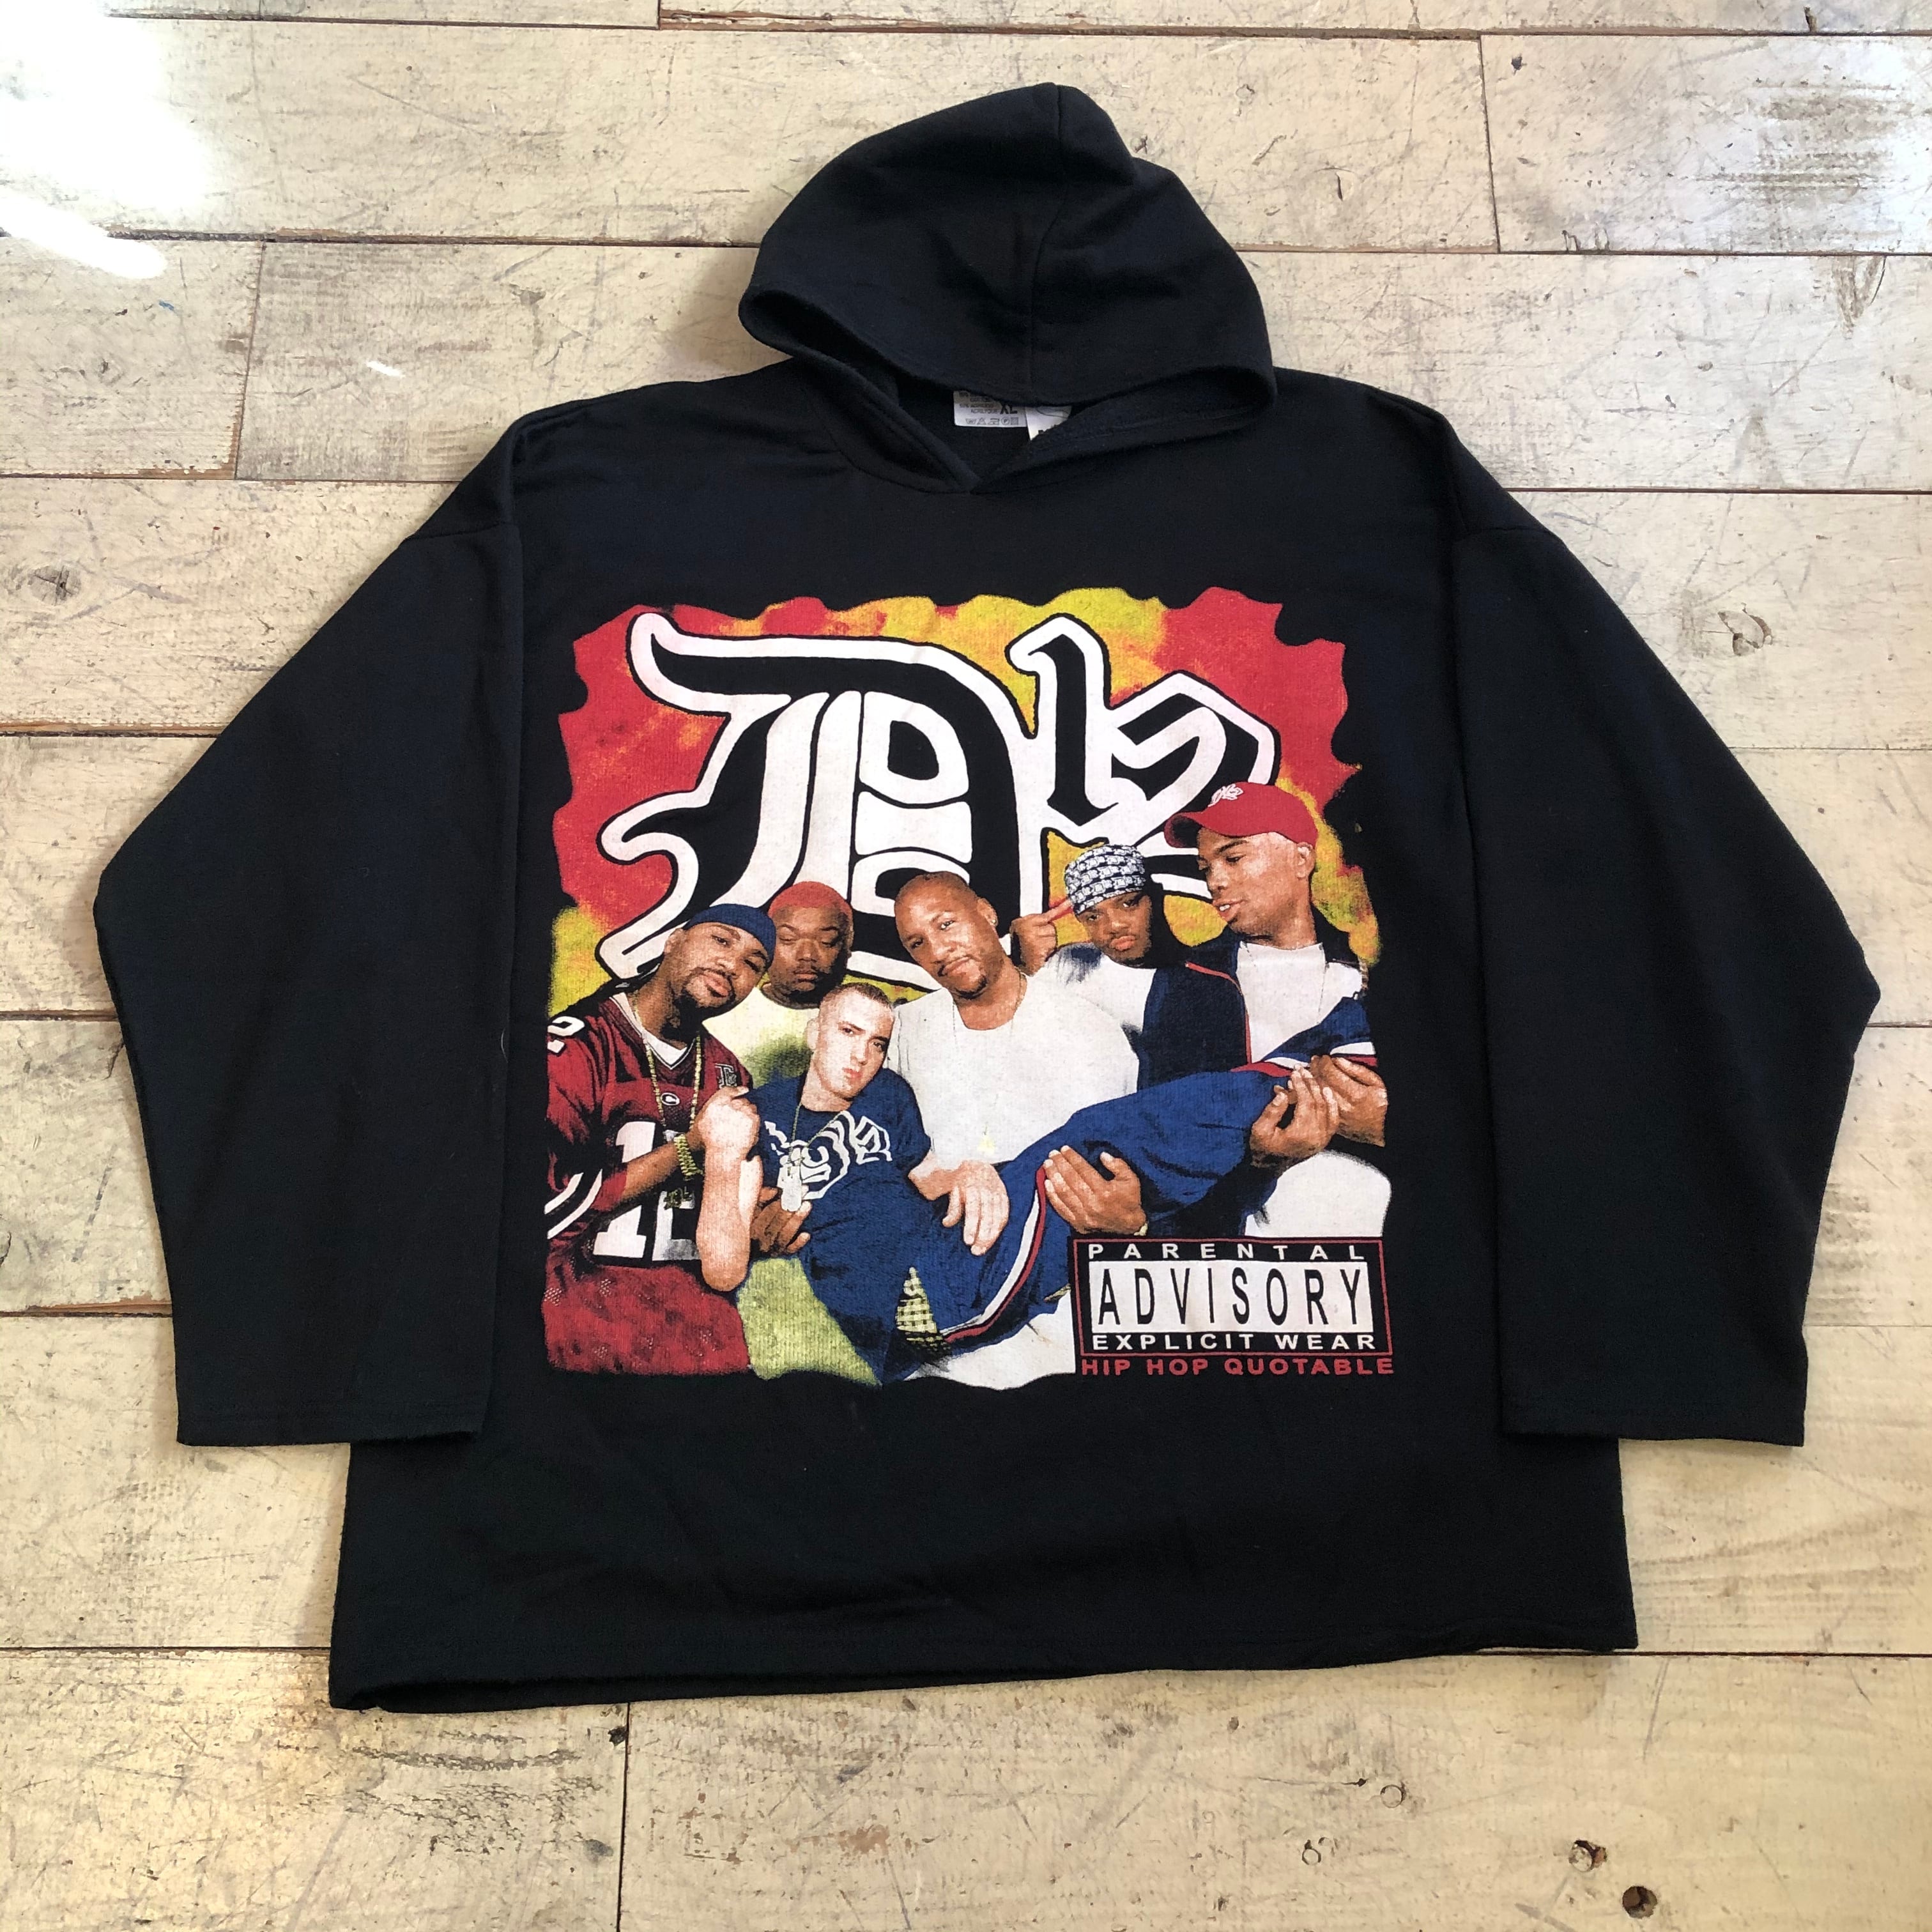 90s〜 EURO BOOTLEG D12 sweat hoodie | What’z up powered by BASE